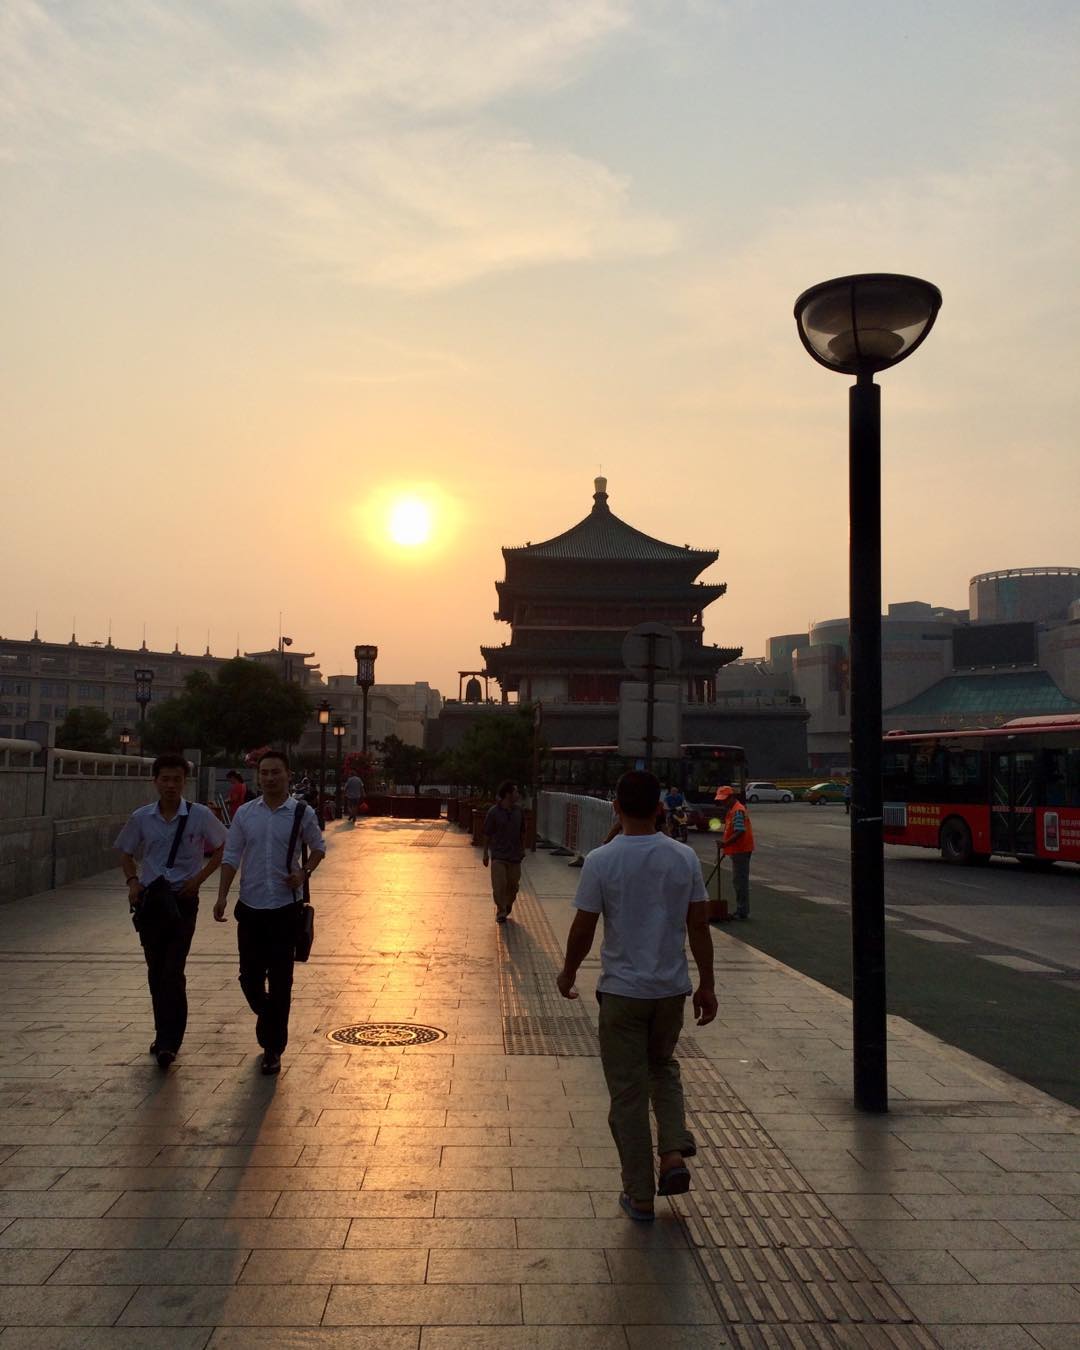 Xian, China 🇨🇳.
.
When the train arrives at 6am and the hostel on the other side of the city doesn't open until 8am, the only thing to do is to walk the 6km and enjoy the morning views, take in the smells, the sounds and watch people going about their life.
.
#travel #china #xian #early #backpacker #asia #chinese #sunrise #backpacking #traveller #explore #city #travelling #instatravel #travelgram #travelholic